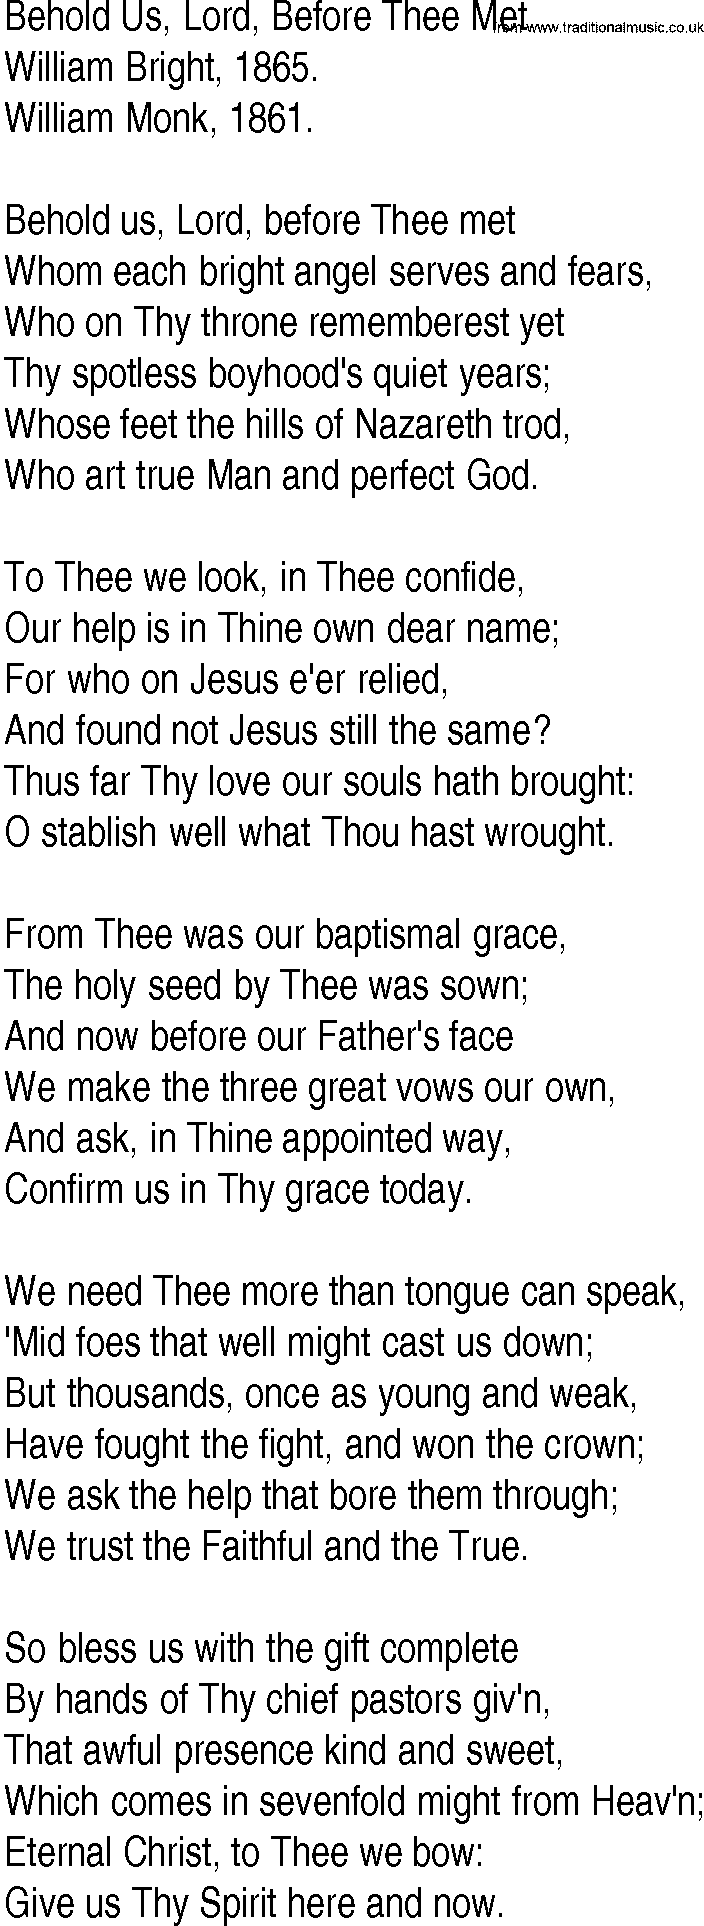 Hymn and Gospel Song: Behold Us, Lord, Before Thee Met by William Bright lyrics